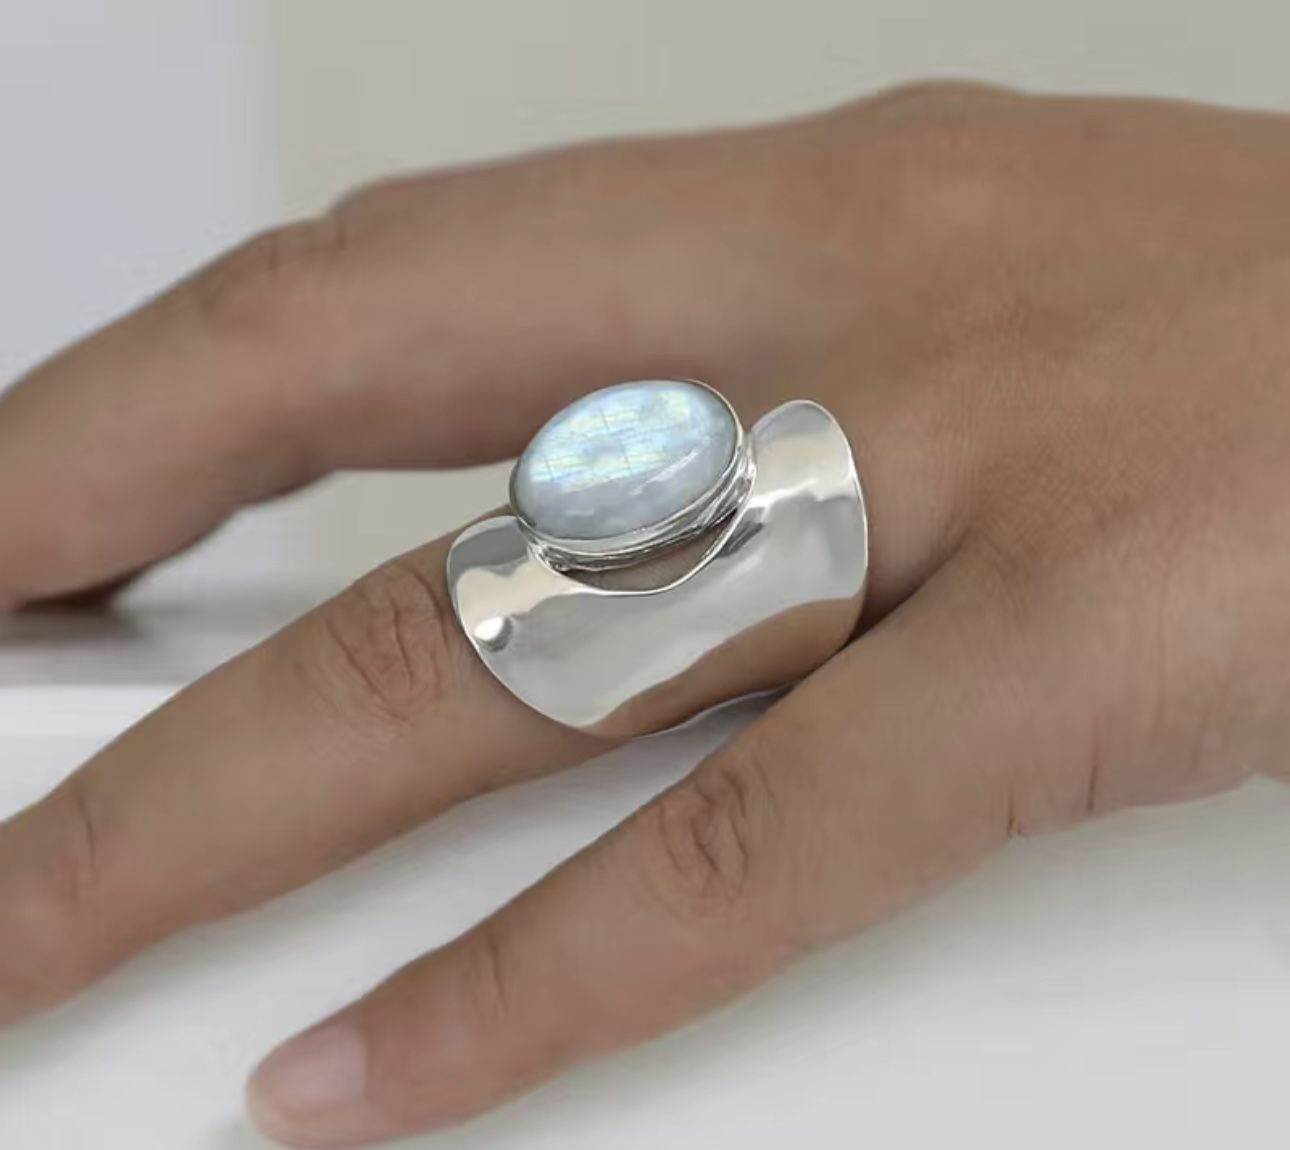 Band Ring Inlaid Moonstone In Egg Shape Special Design Size 7